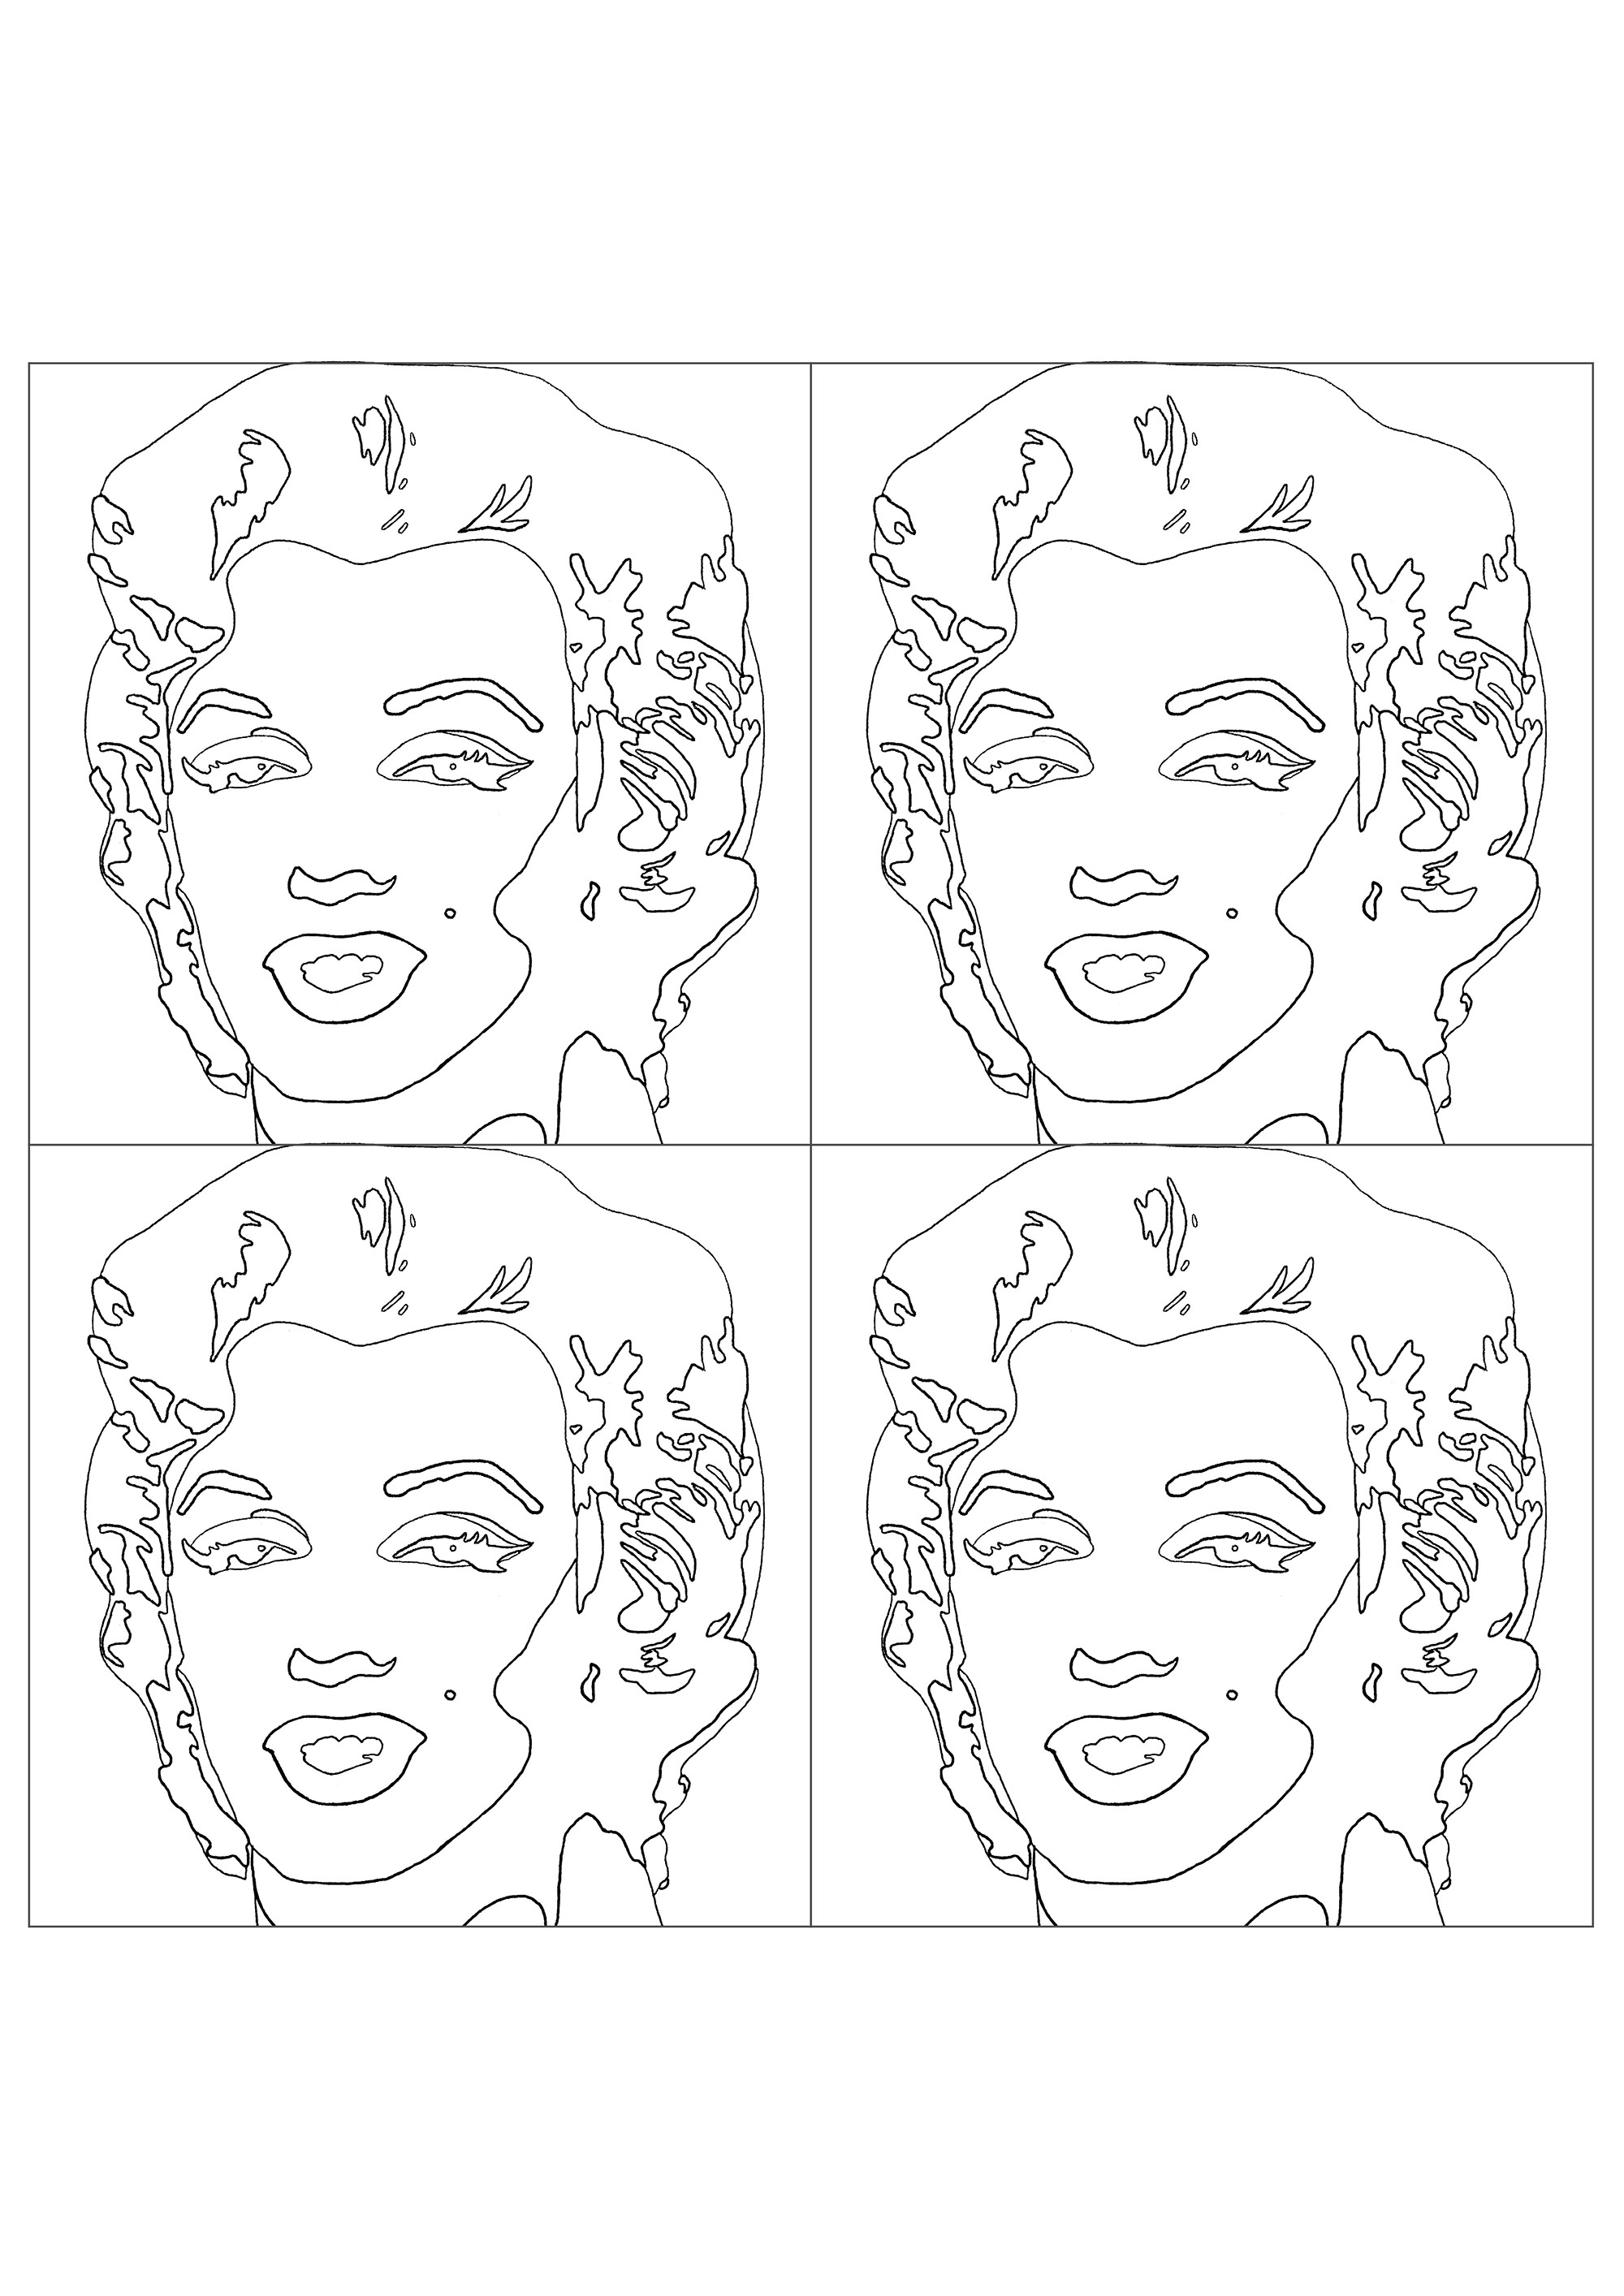 Coloring based on Andy Warhol's 'Shot Sage Blue Marilyn' (reworked version with four portraits). This famous canvas by the Pop Art master was sold for 195 million US dollars in 2002 by Christie's auction house in New York. At the time, it became the most expensive 20th-century work ever sold, dethroning the previous record held by a painting by Basquiat, who was friends with Andy Warhol.